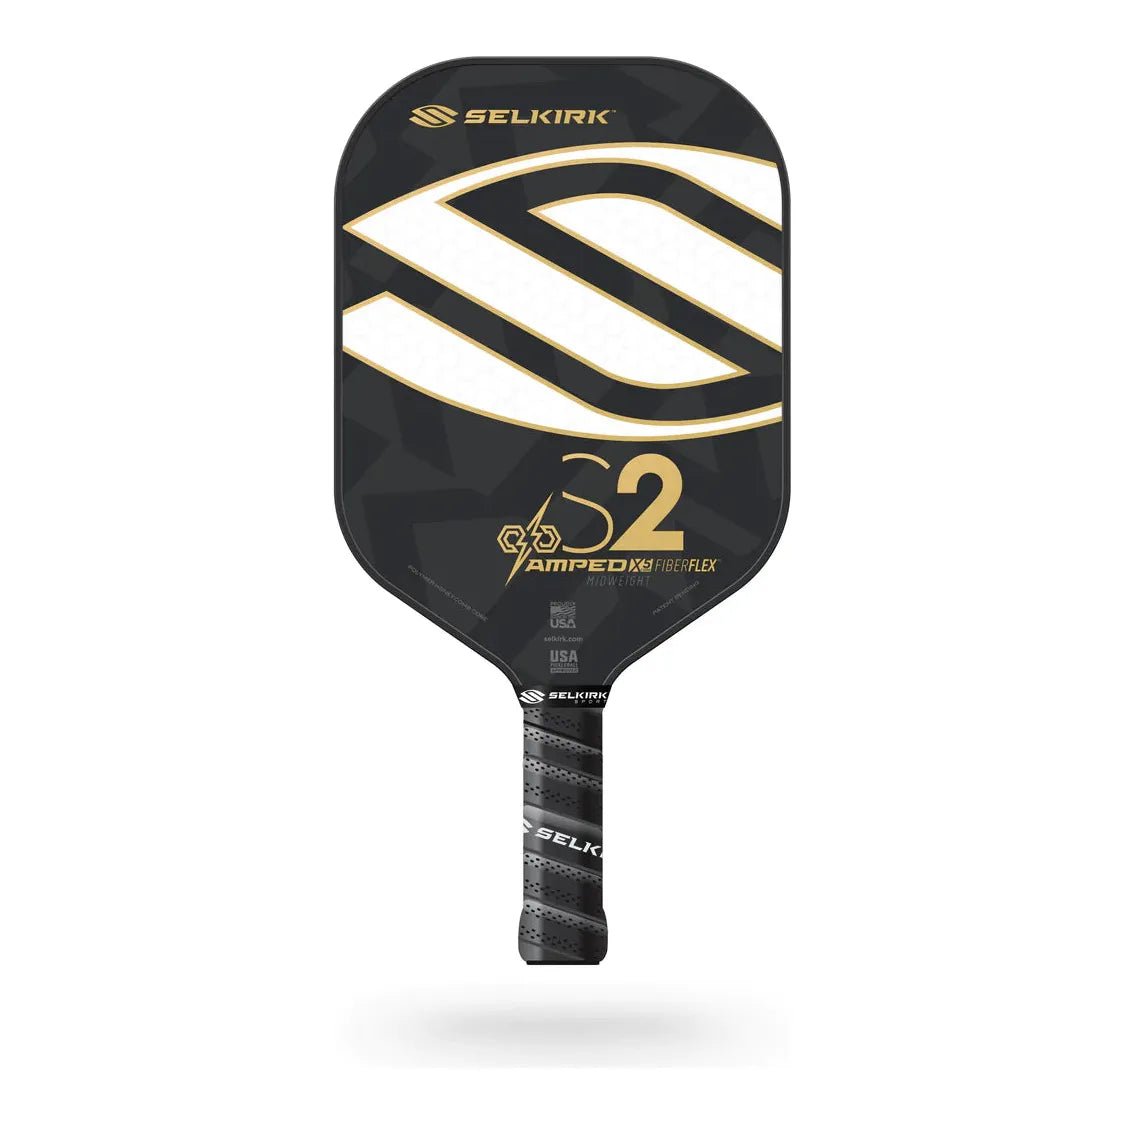 AMPED S2 - Grip On Golf & Pickleball Zone